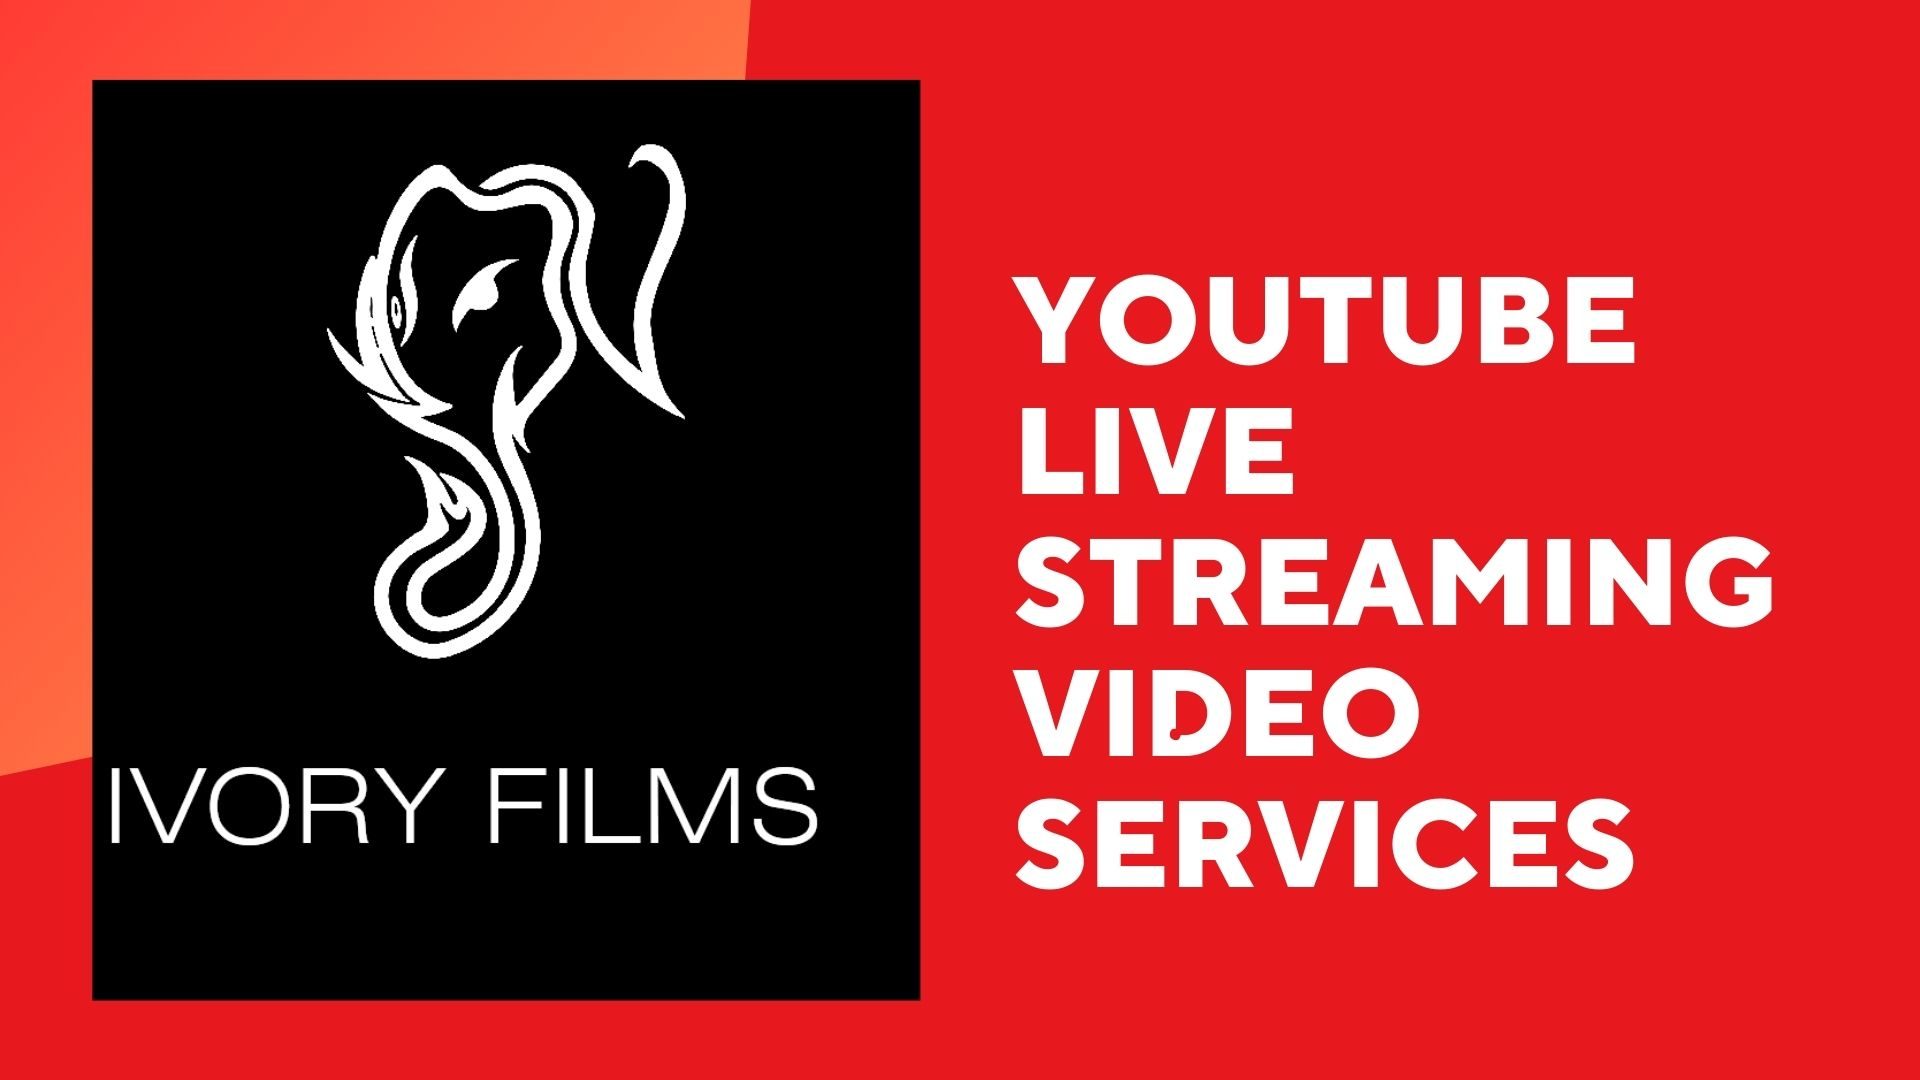 Youtube Live Streaming Services